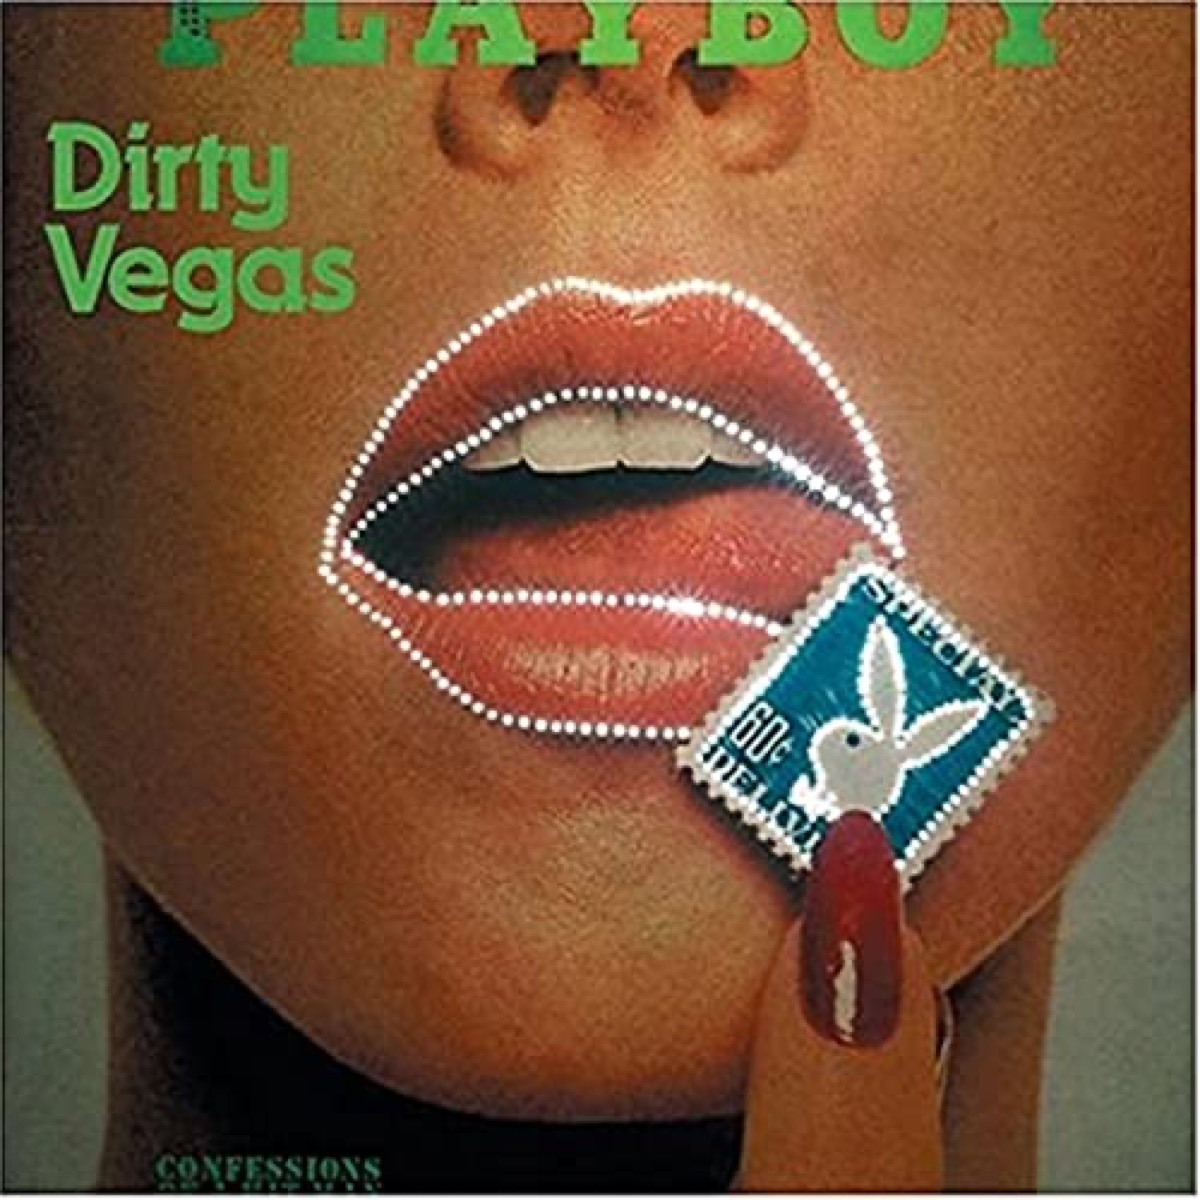 The album cover of "One" by Dirty Vegas